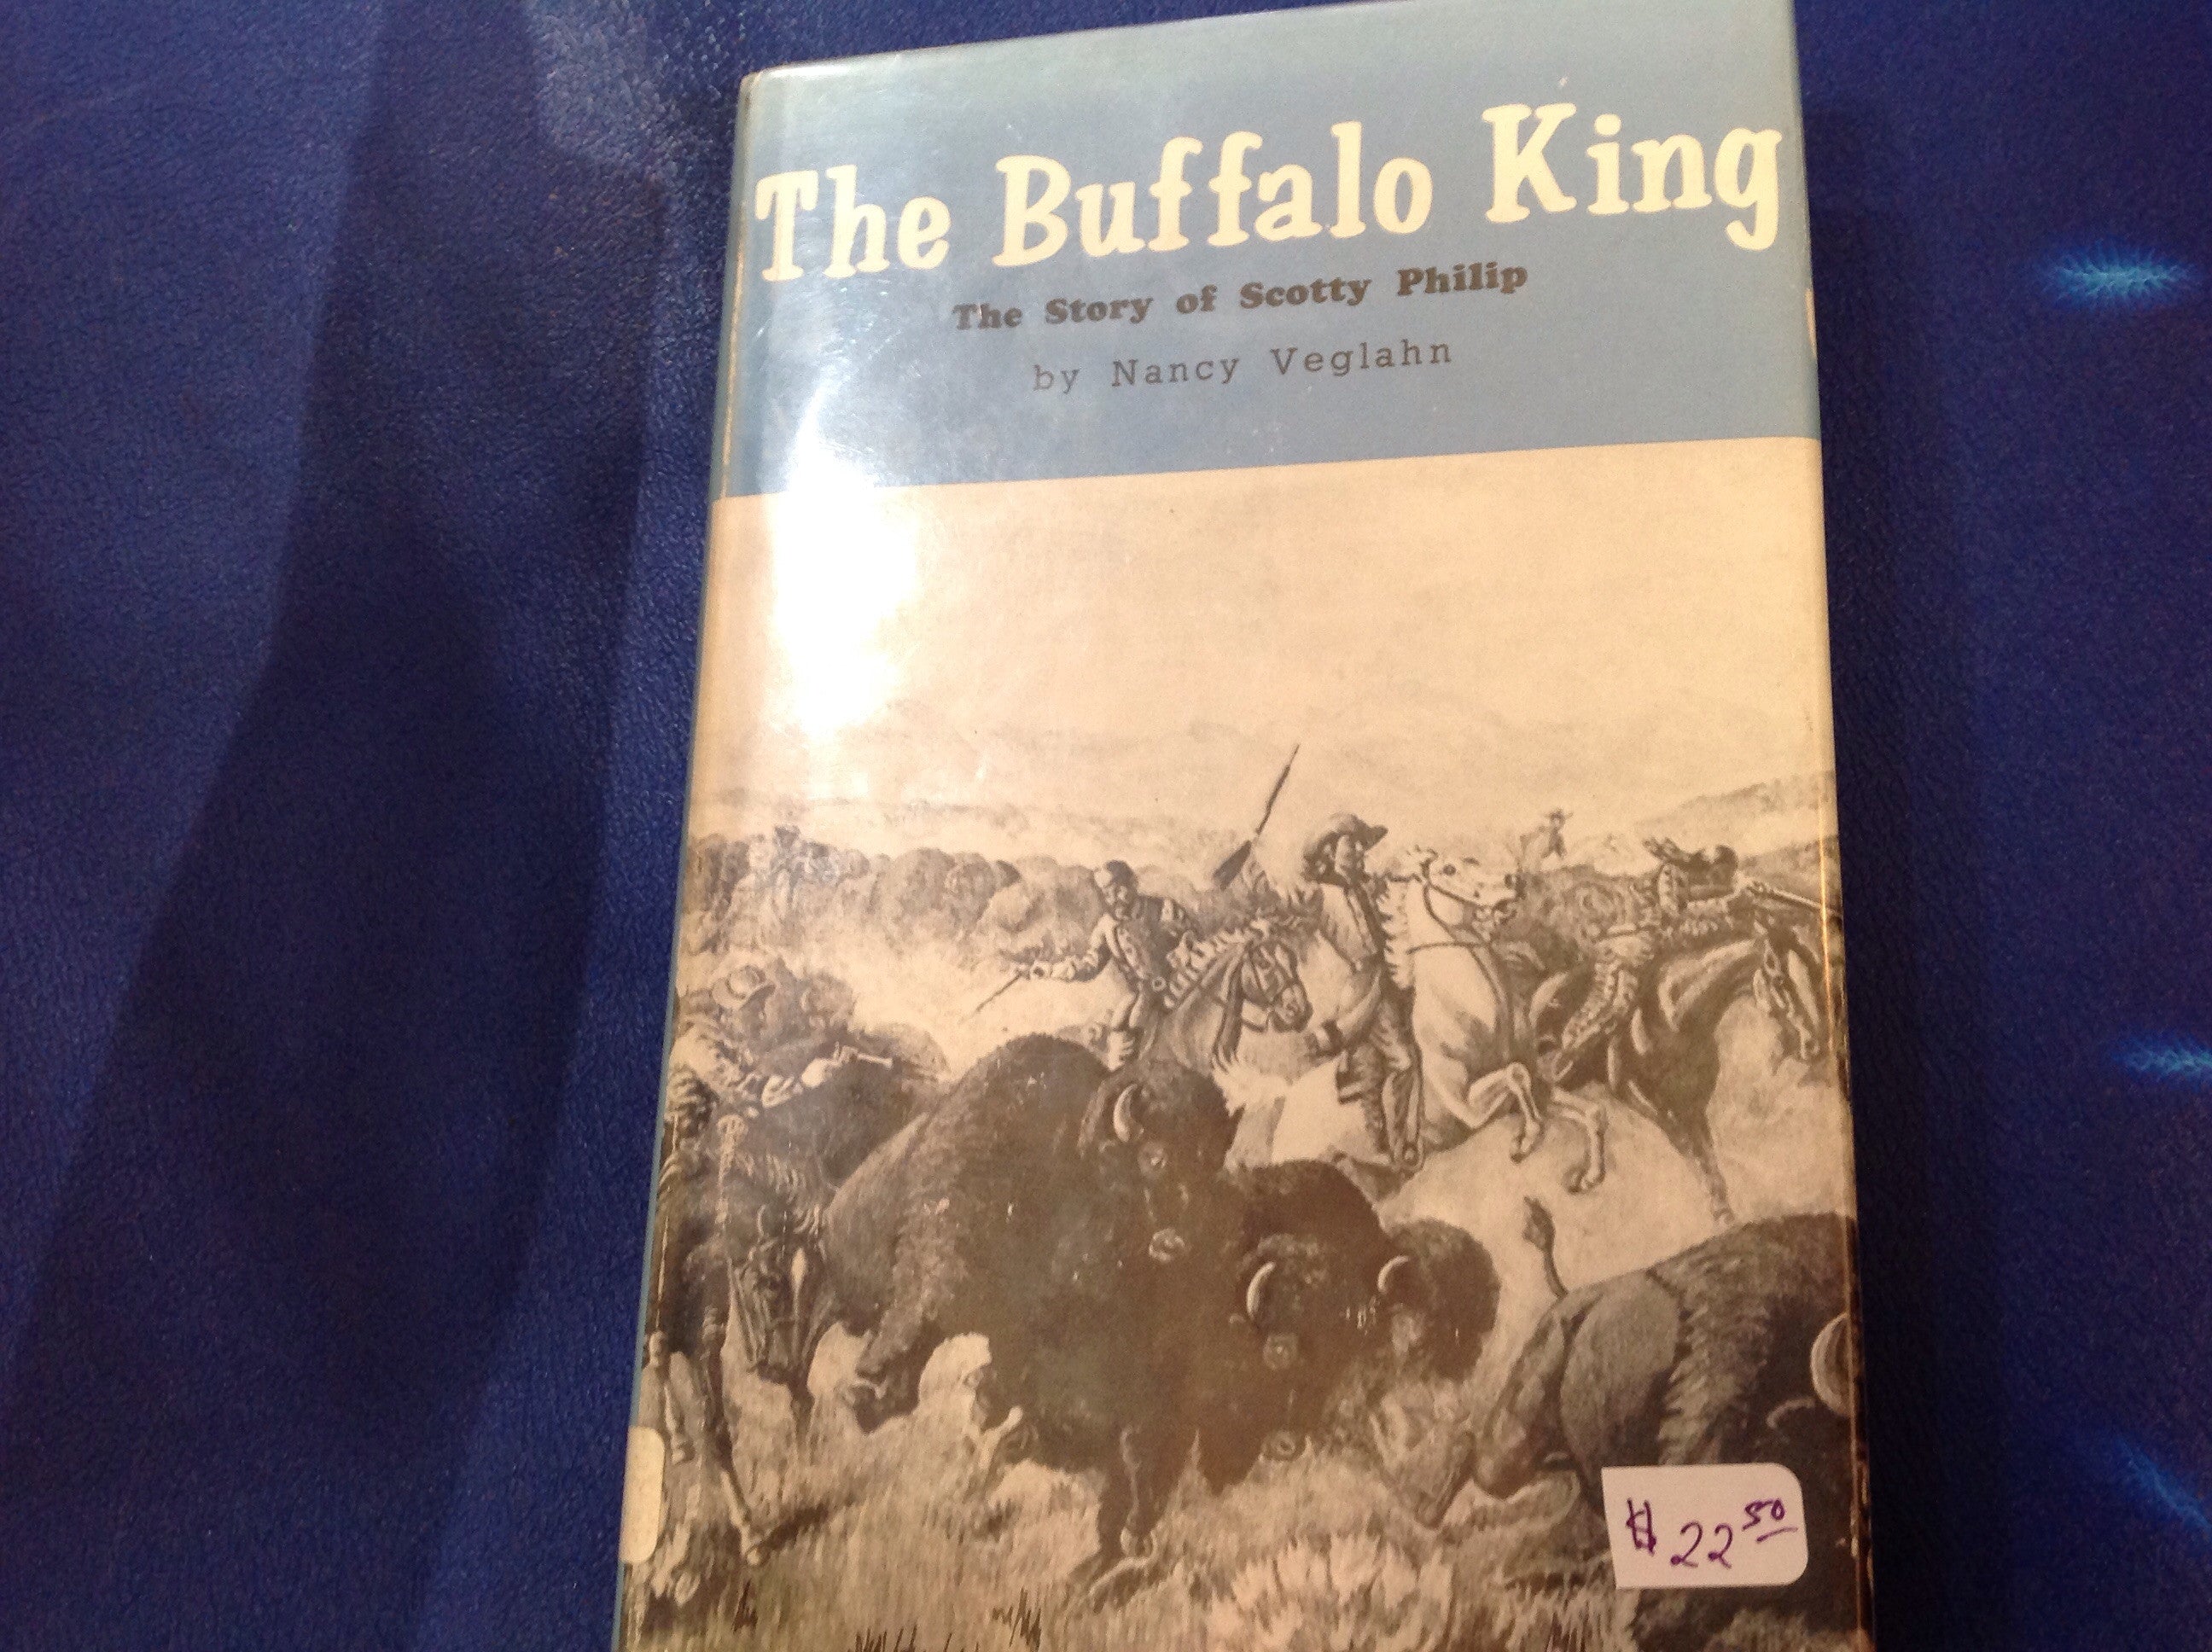 BOOKS - The Buffalo King: The Story of Scotty Phillip